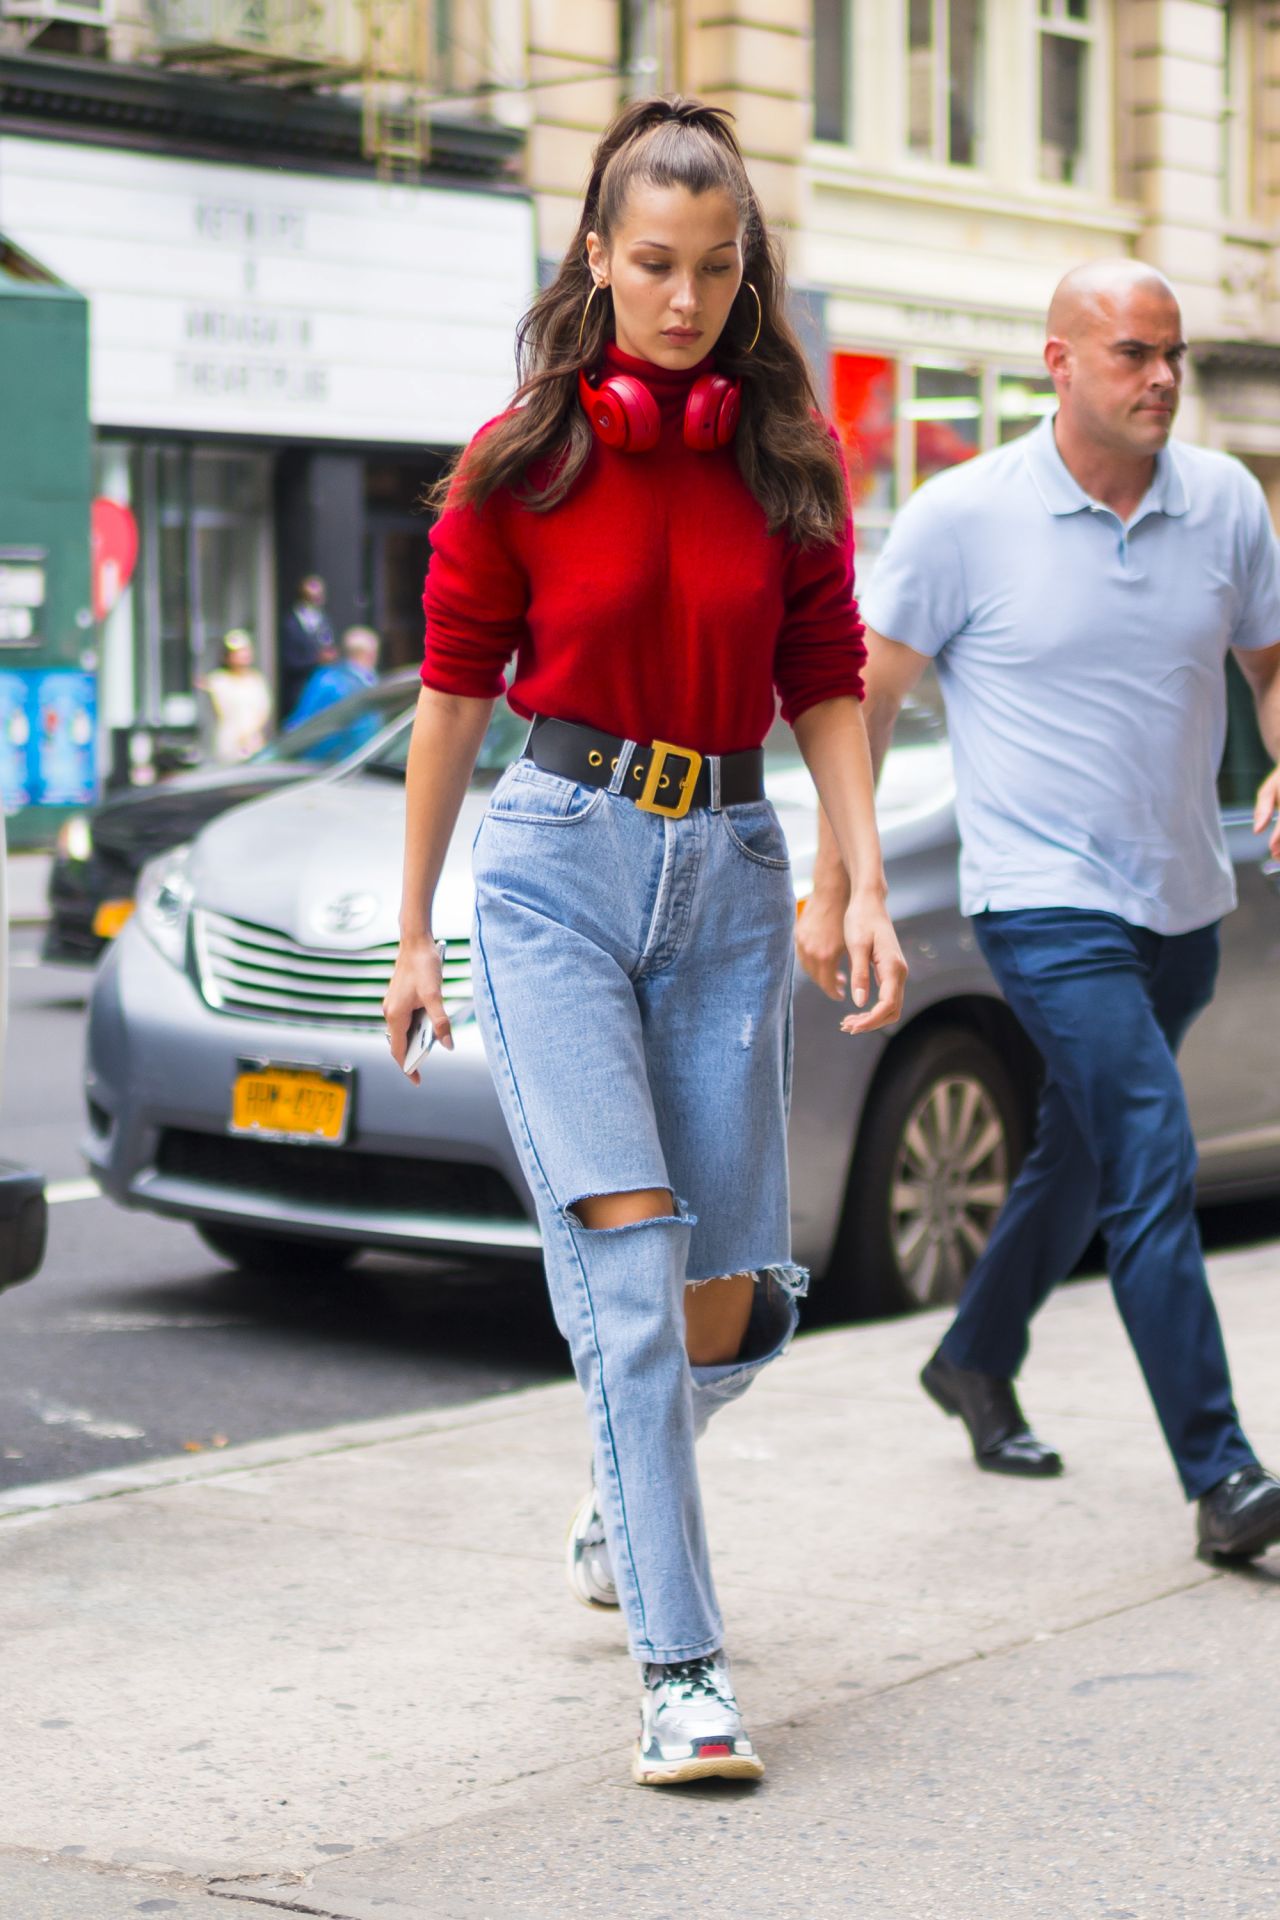 Bella Hadid - Arriving for Fittings at the Alexander Wang Office in NYC ...